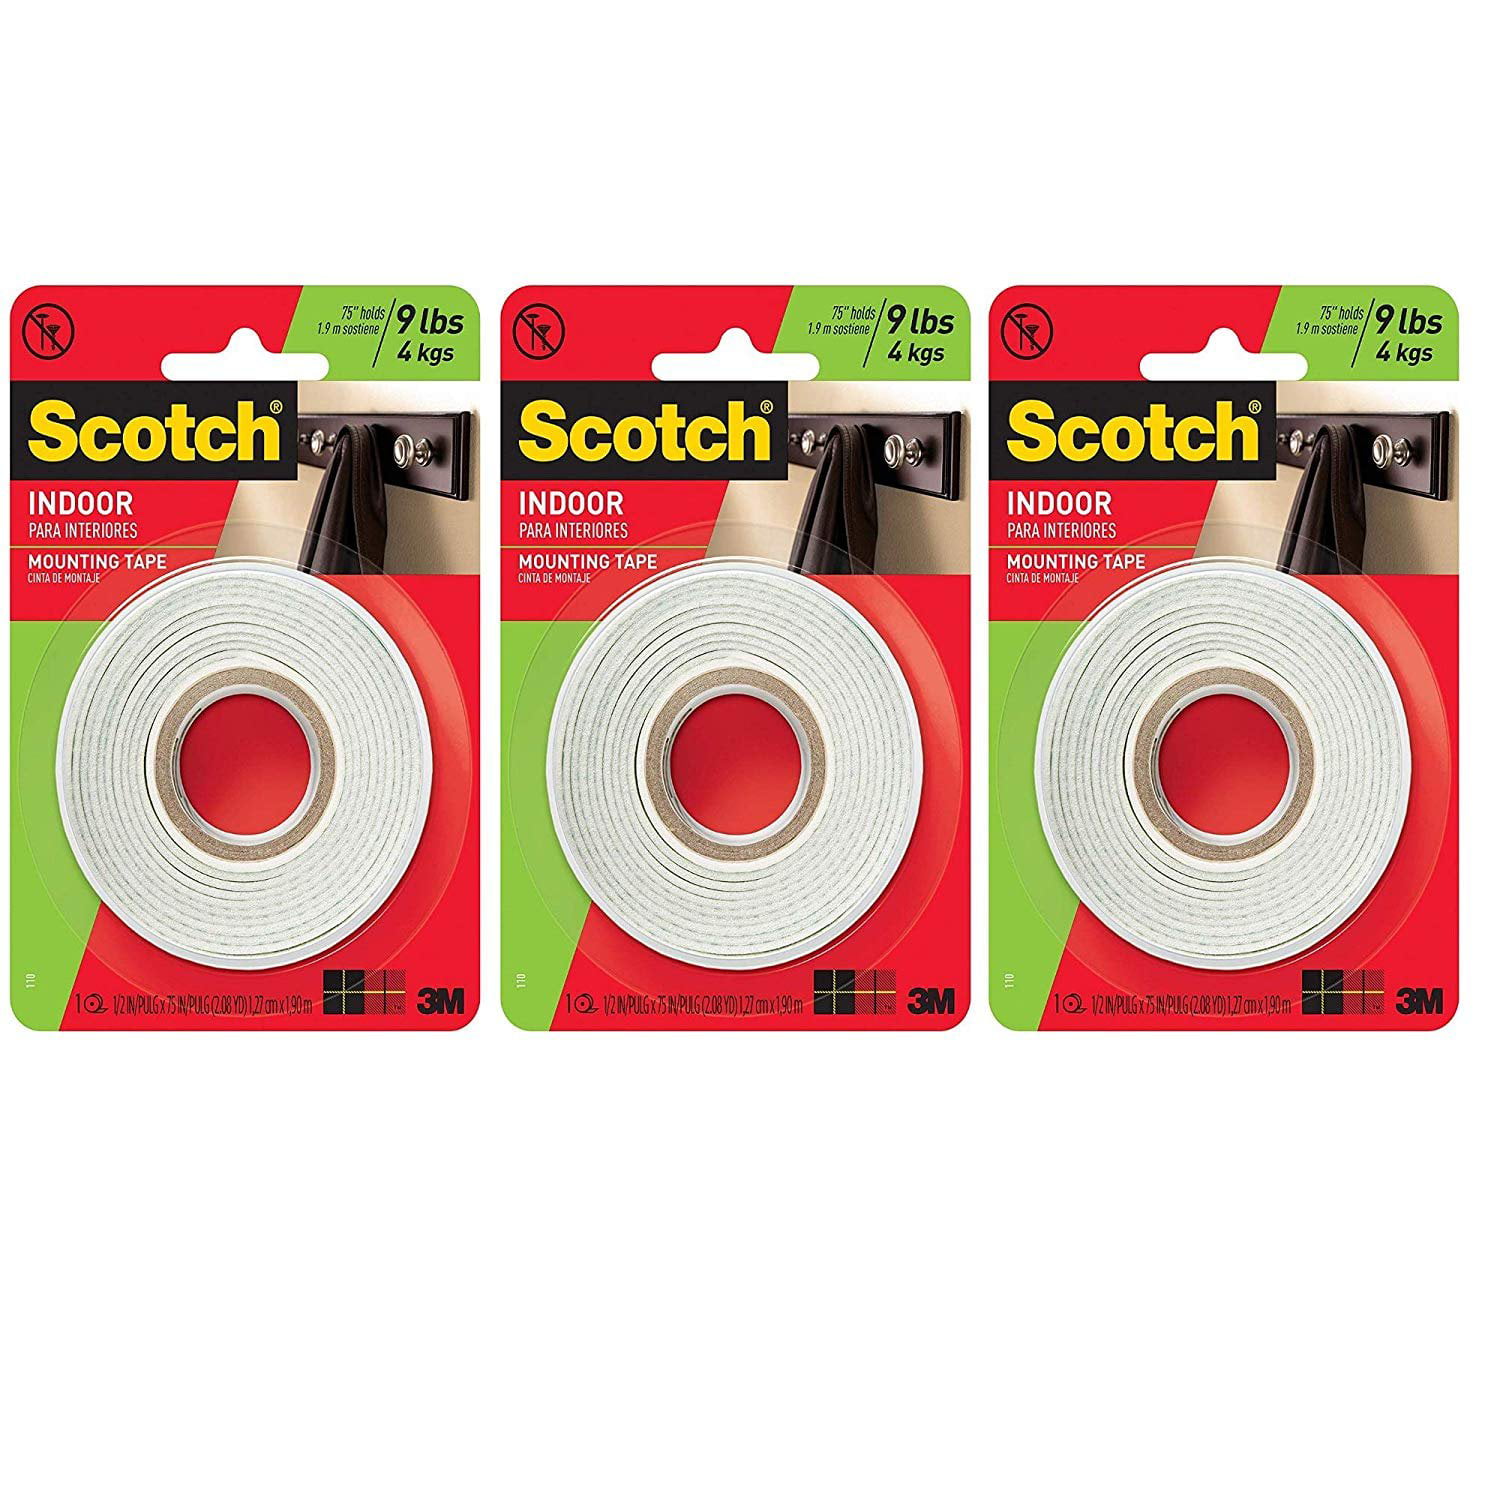 Scotch Mounting Tape 75" Holds up to 9lbs